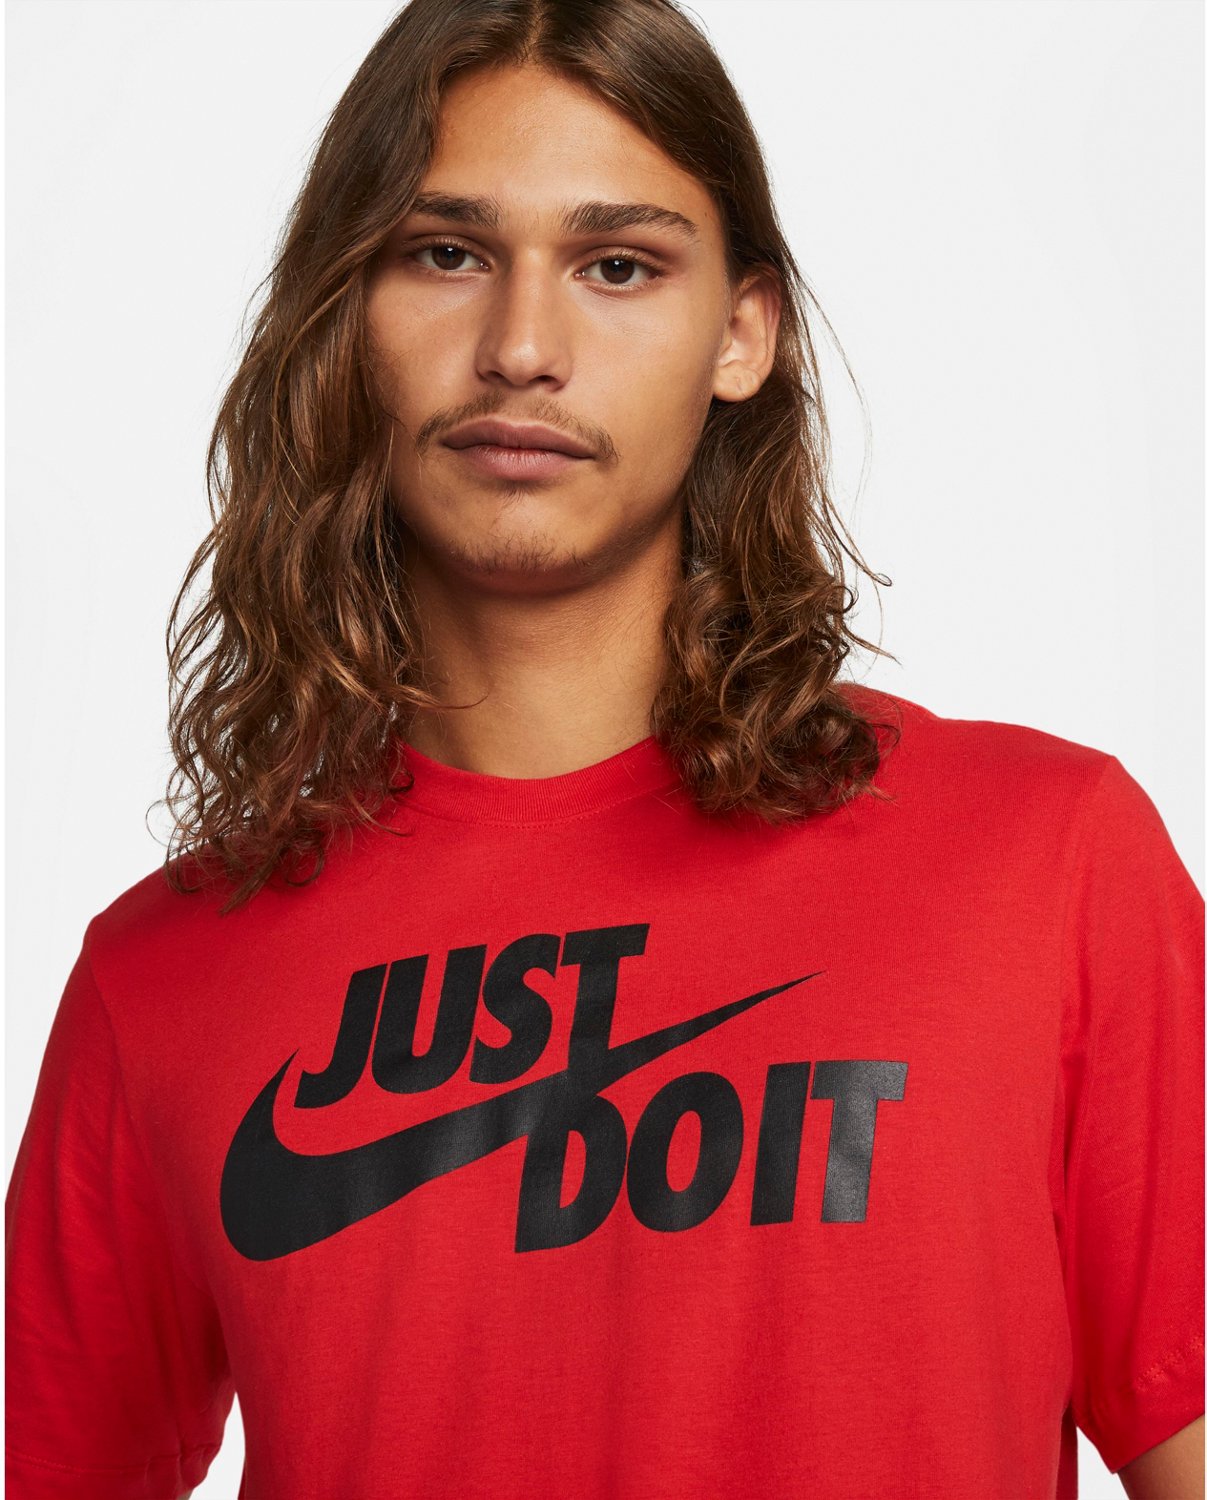 Nike Men\'s Just Shipping T-shirt | at Academy Free Do It